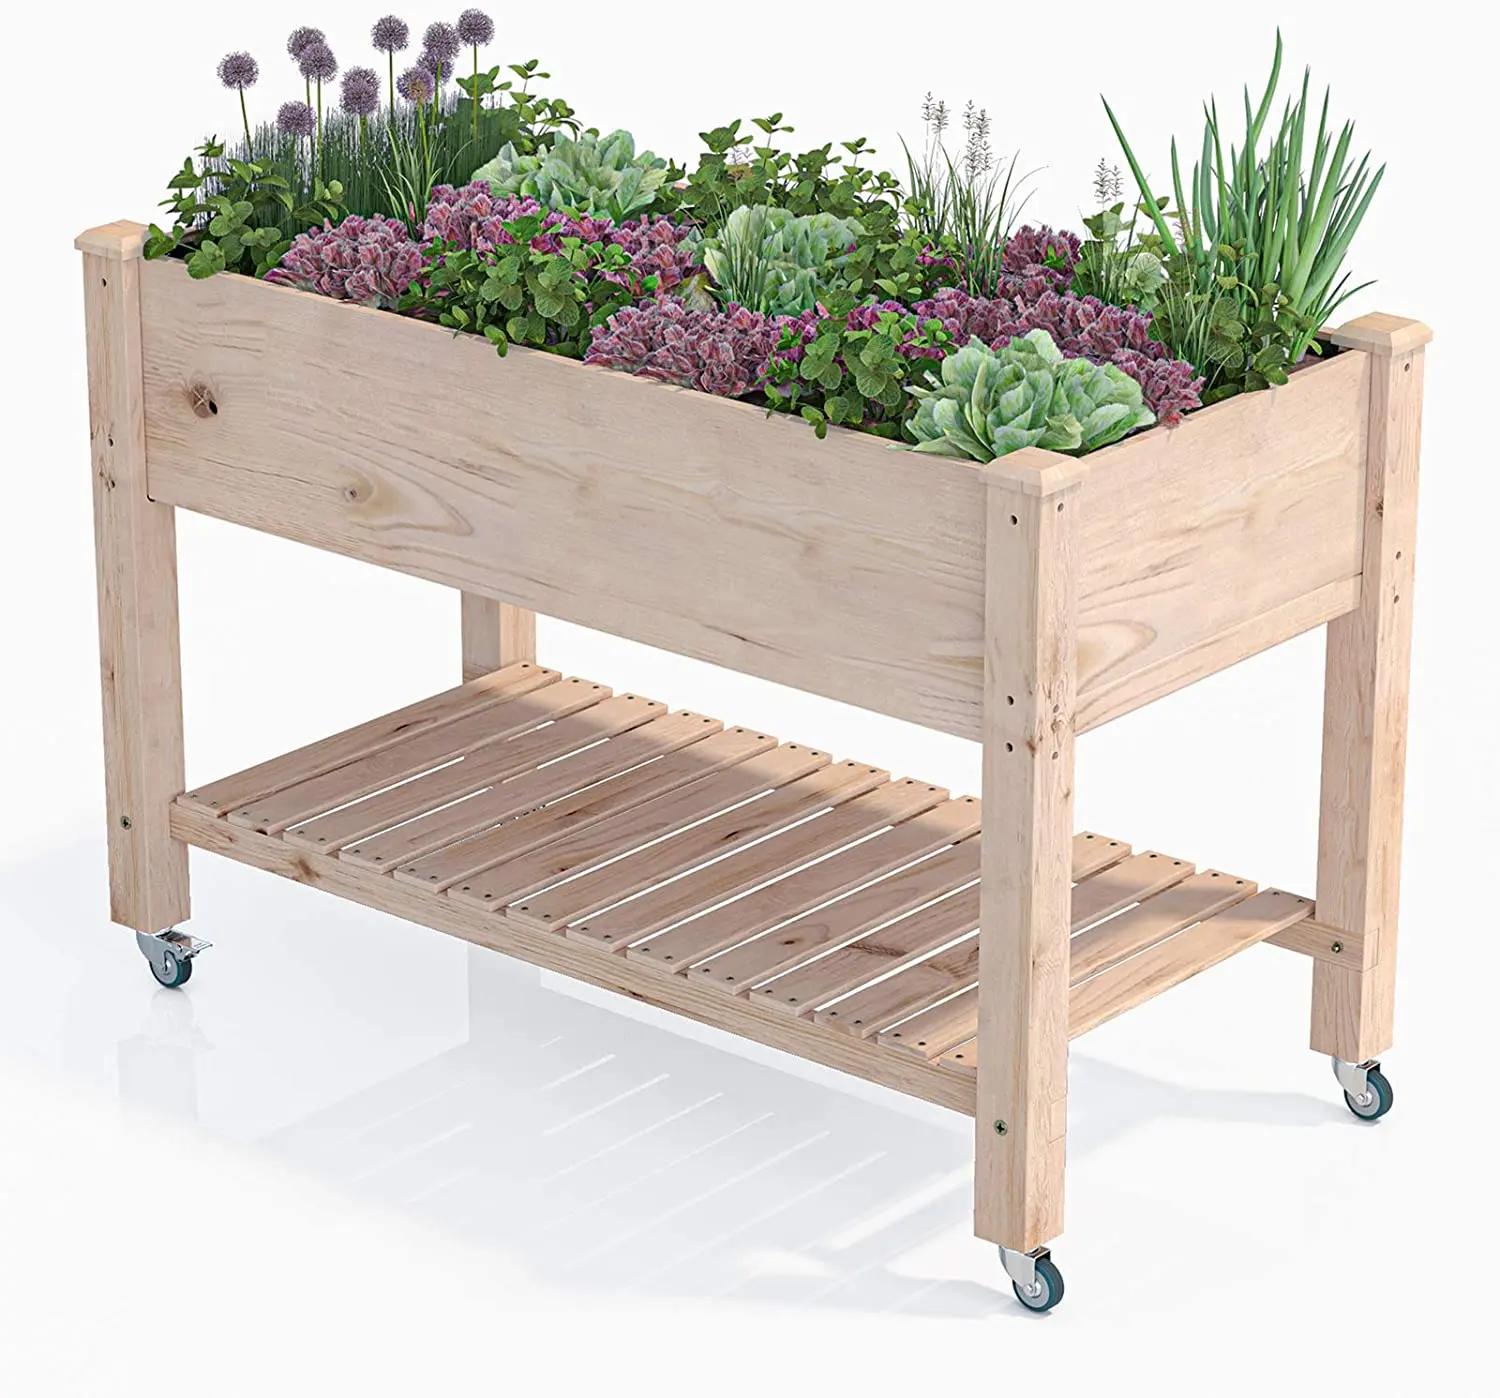 Elevated Wood Planter Box Stand for Backyard Patio Raised Garden Bed